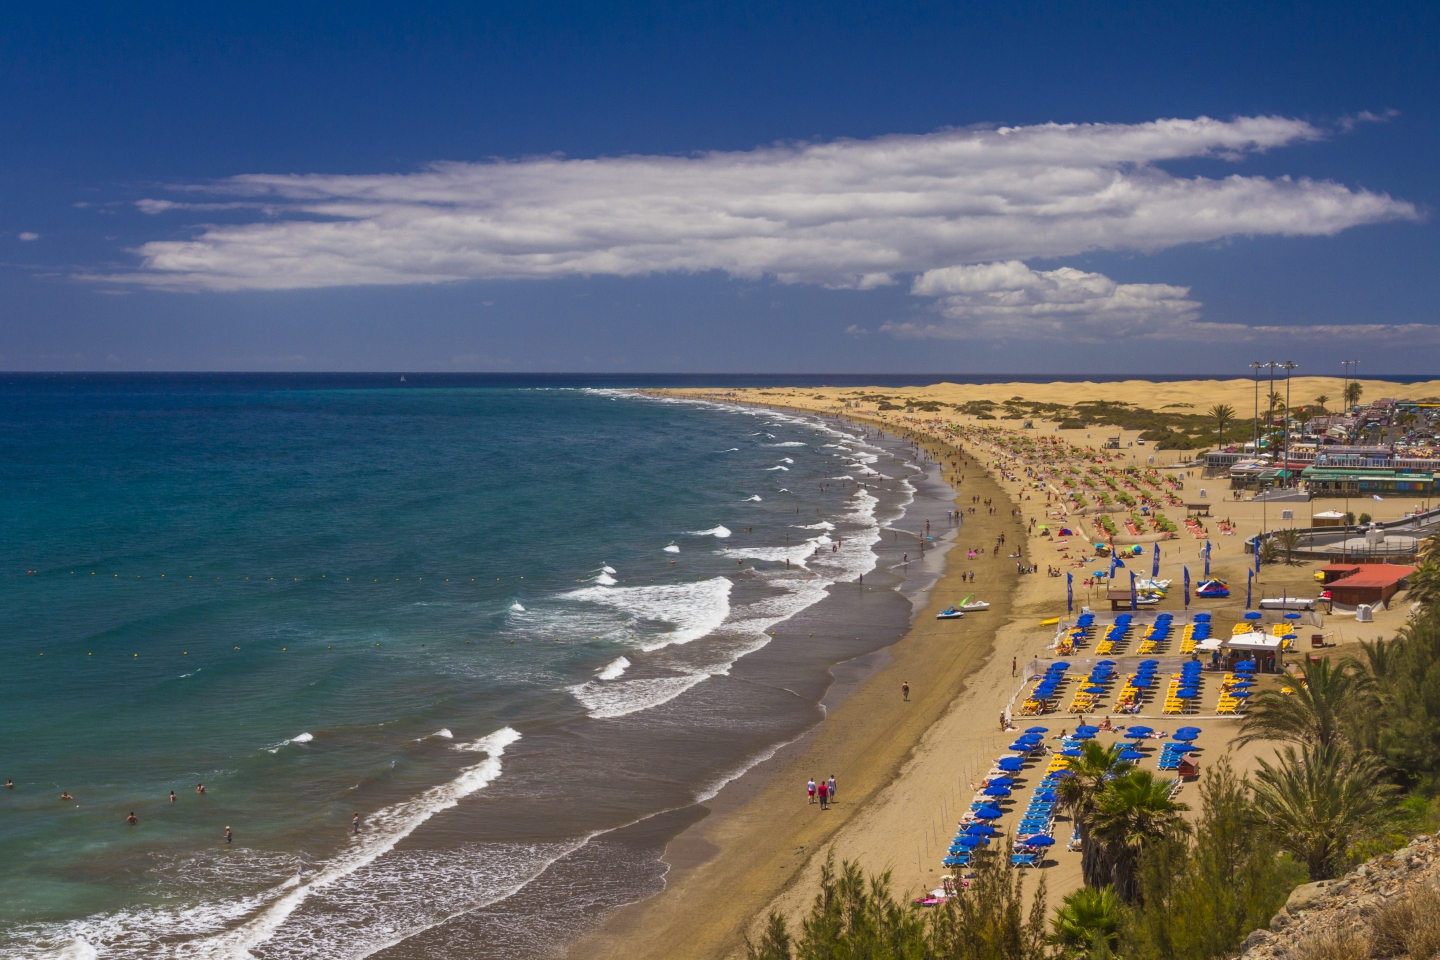 Playa del Ingles beach has a water sports centre right on the sand